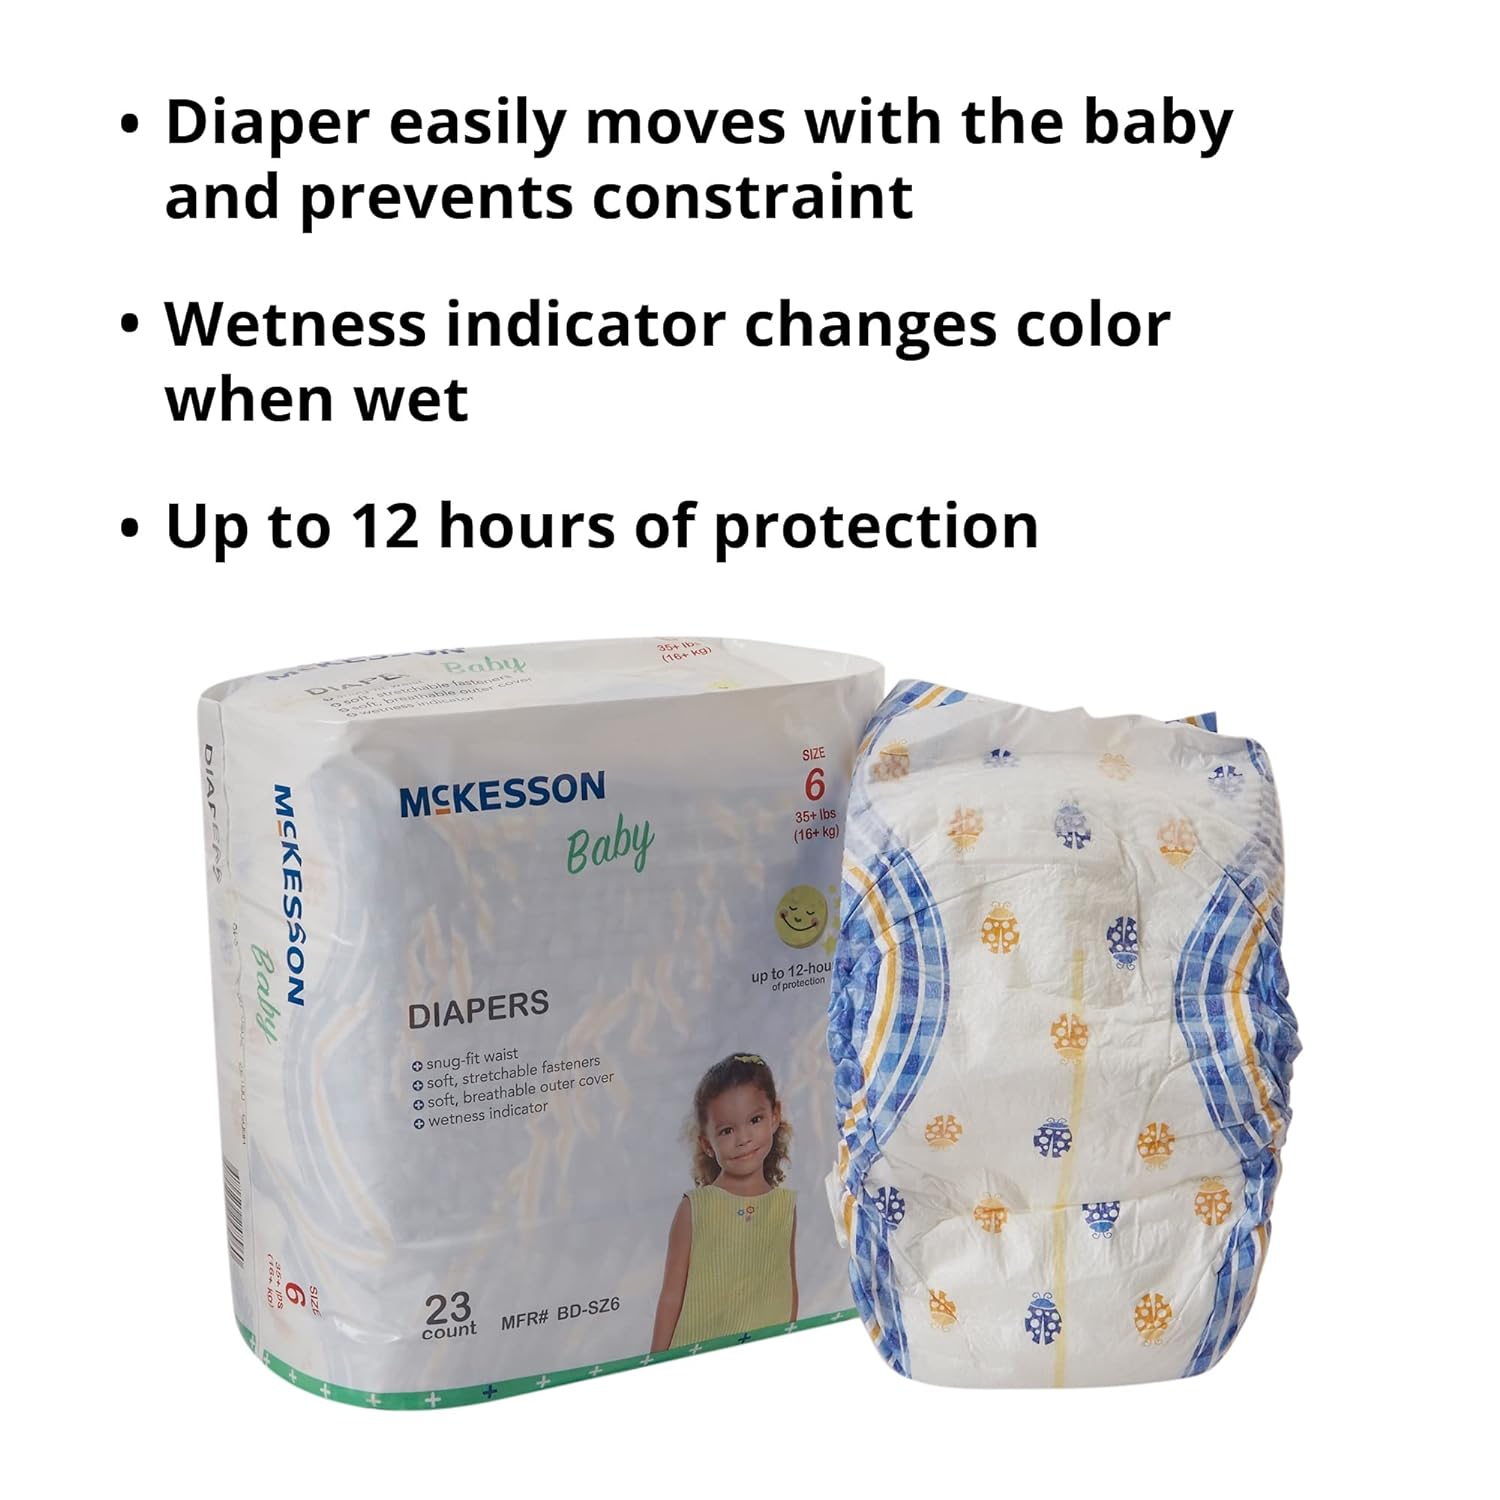 McKesson Baby Diapers, Size 6 (Over 35 lbs), 23 Count, 1 Pack